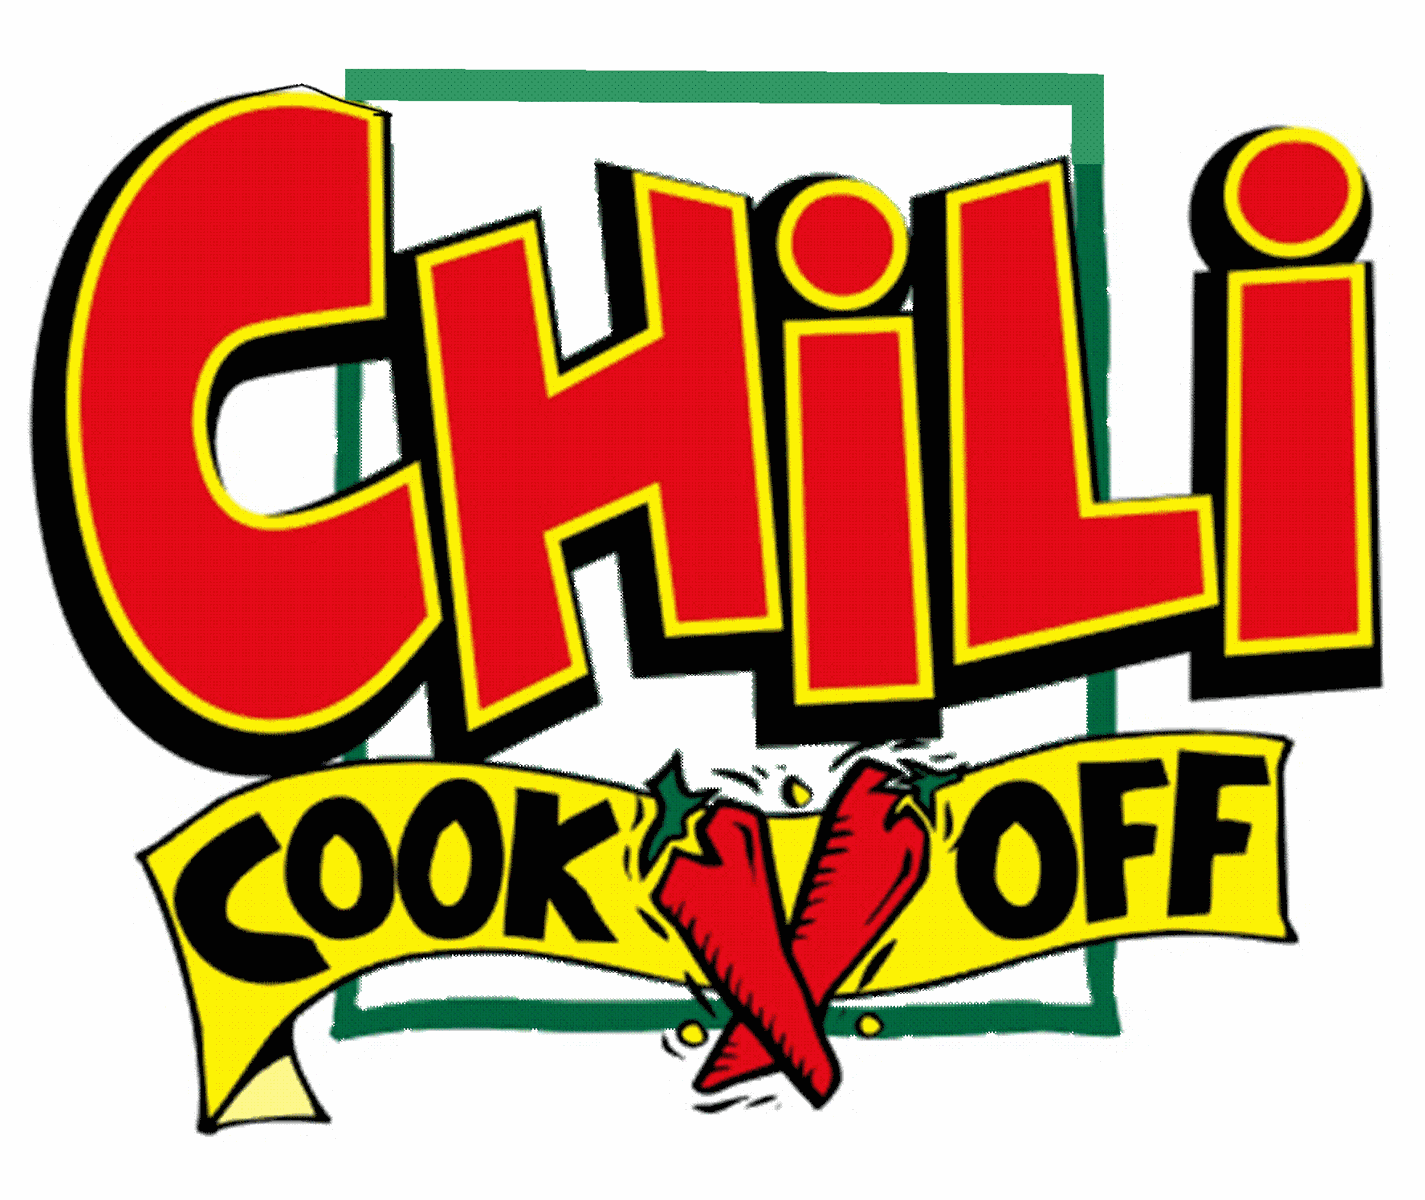 Chili Cook Off Clipart - ClipArt Best